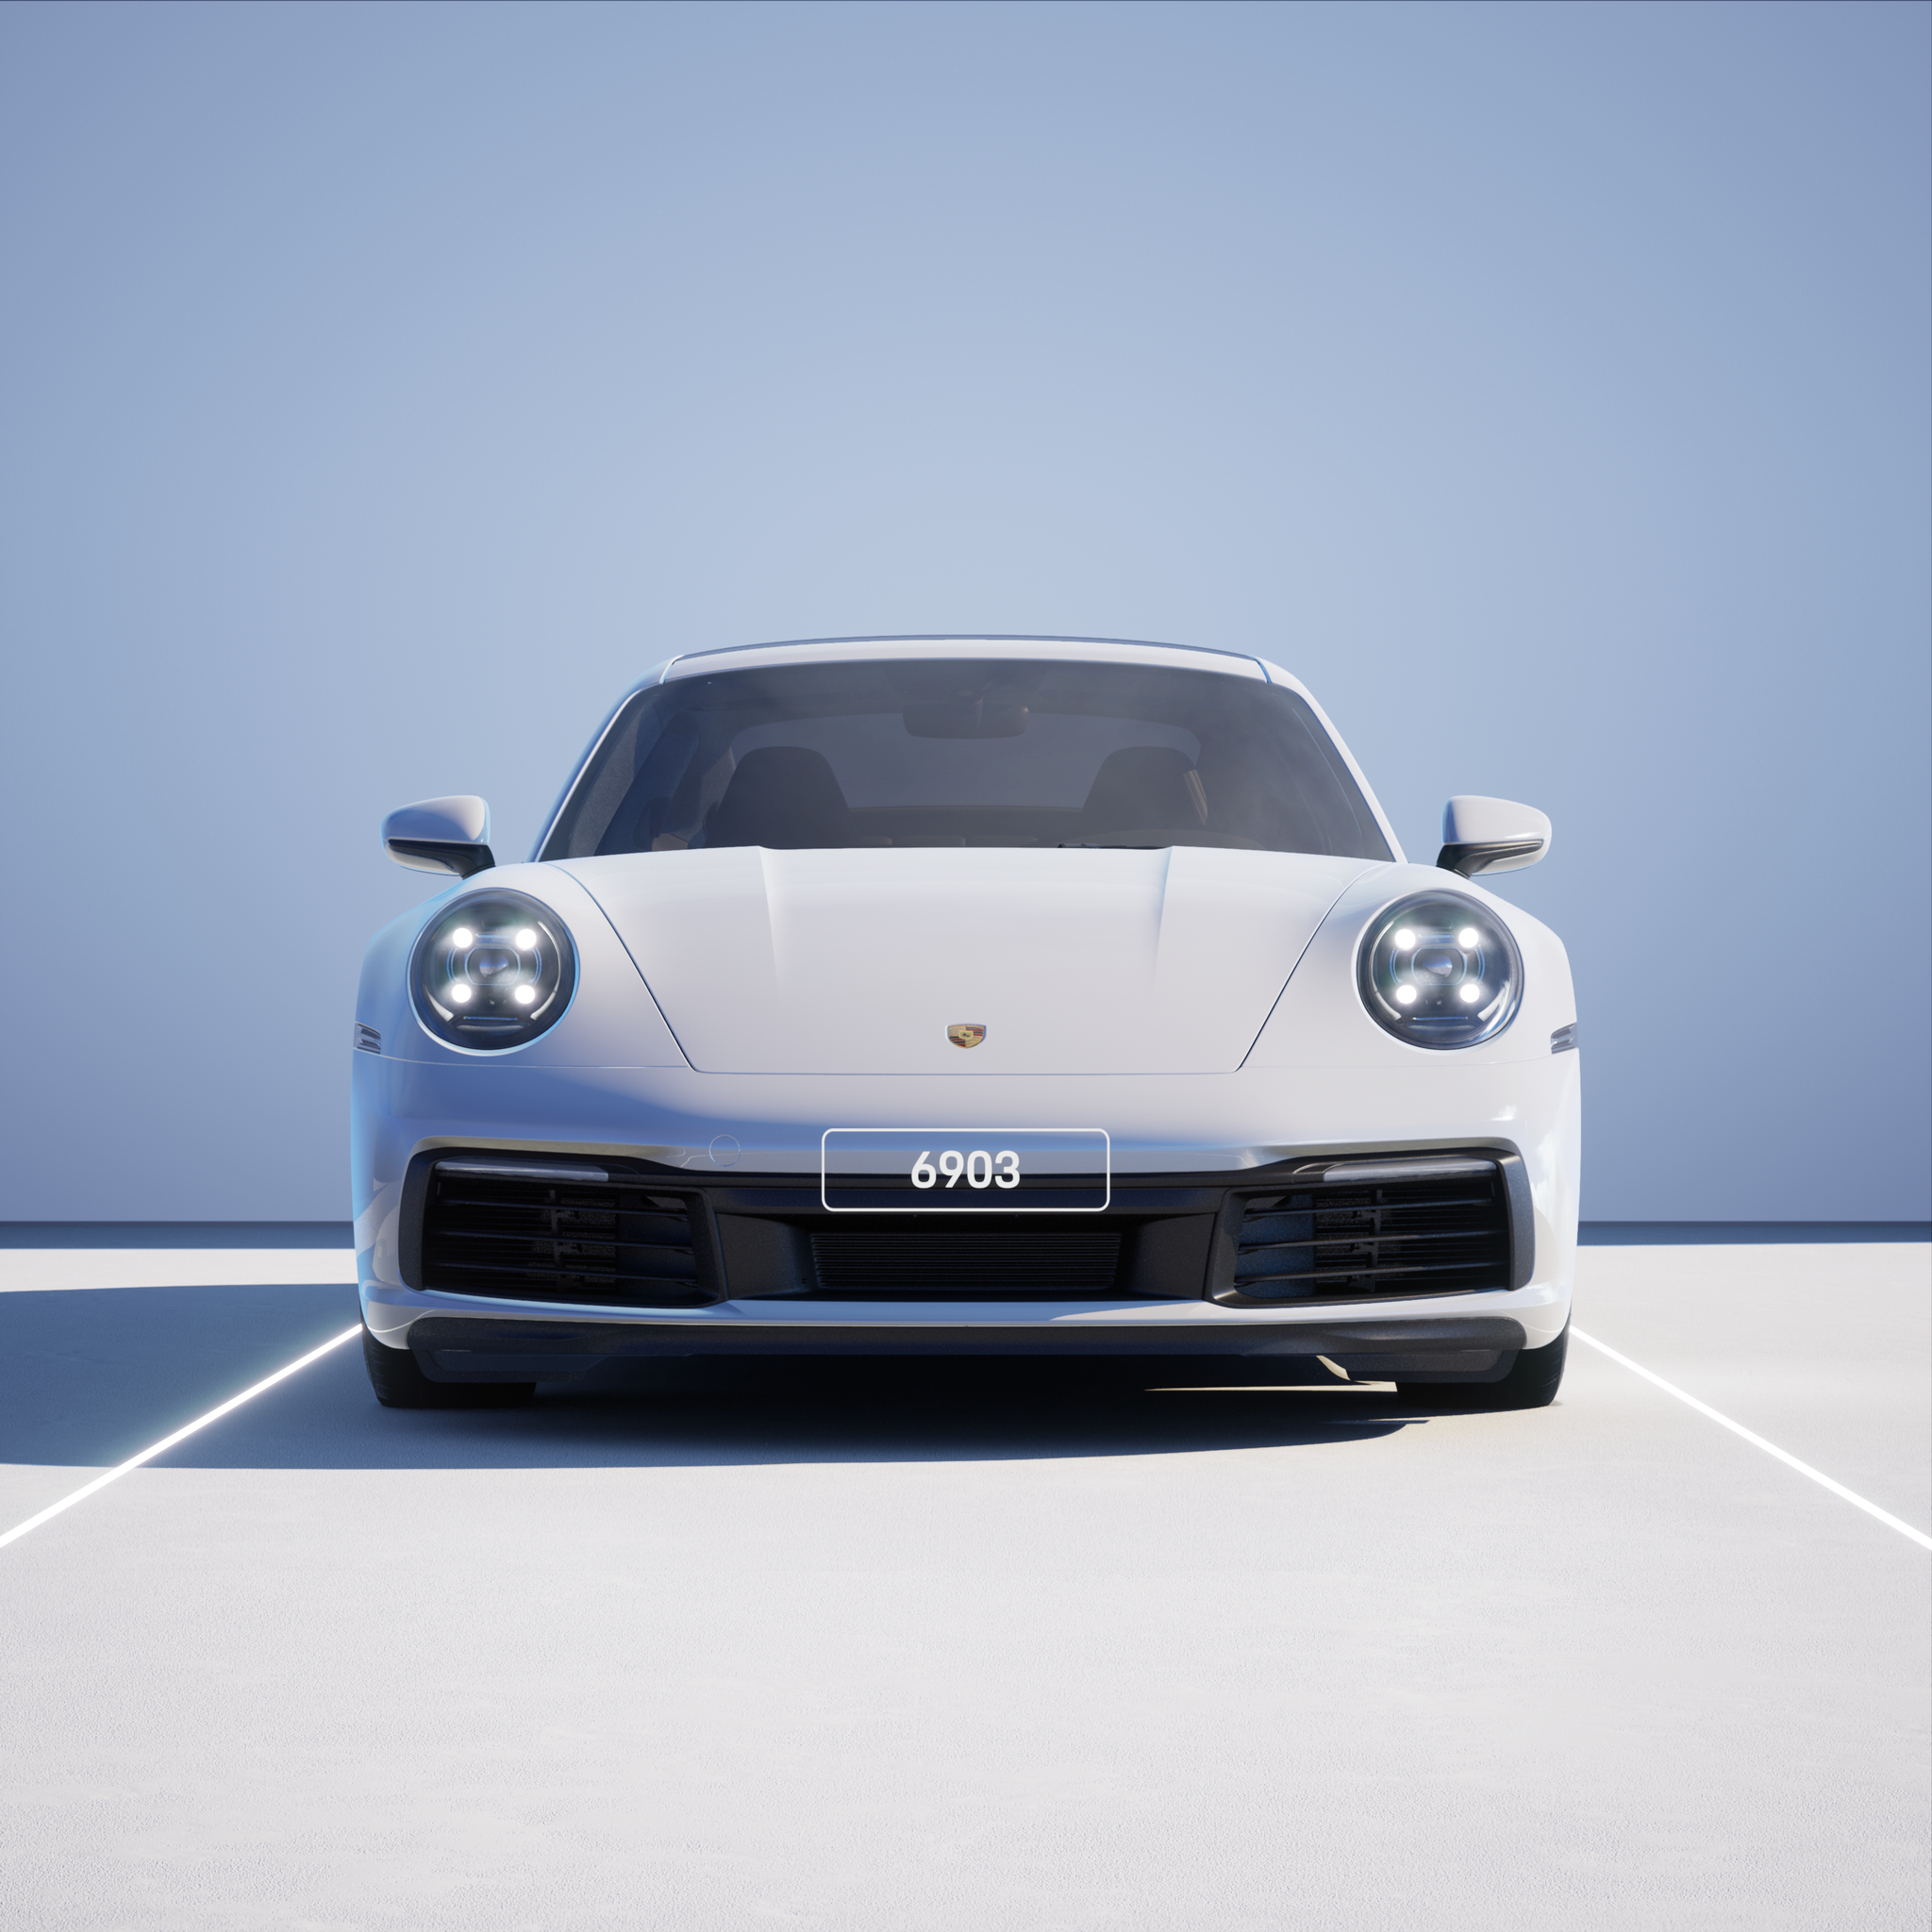 The PORSCHΞ 911 6903 image in phase